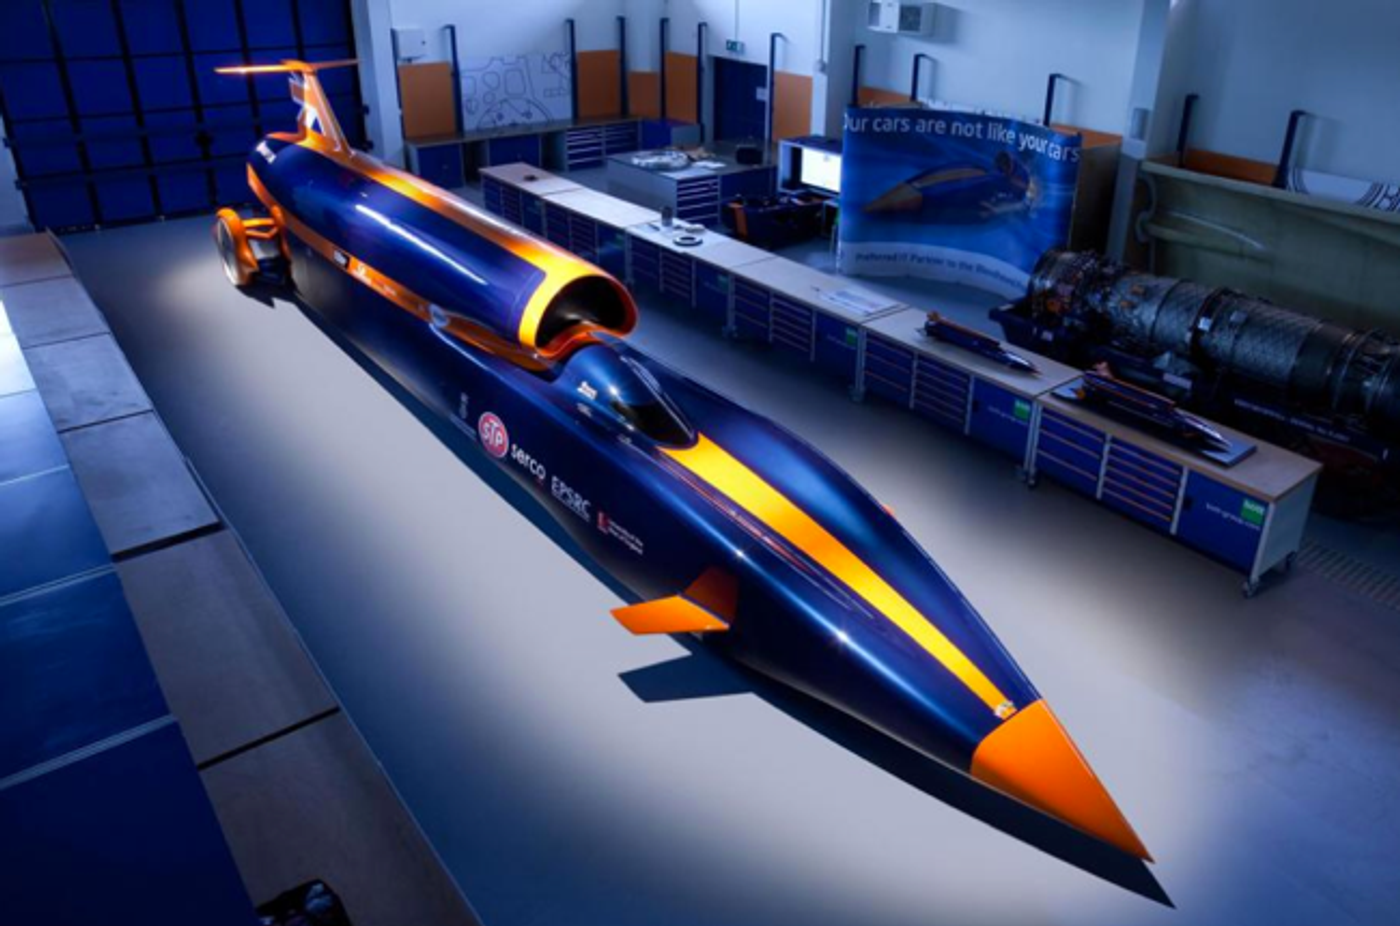 The Bloodhound will attempt to travel 1000 miles per hour.